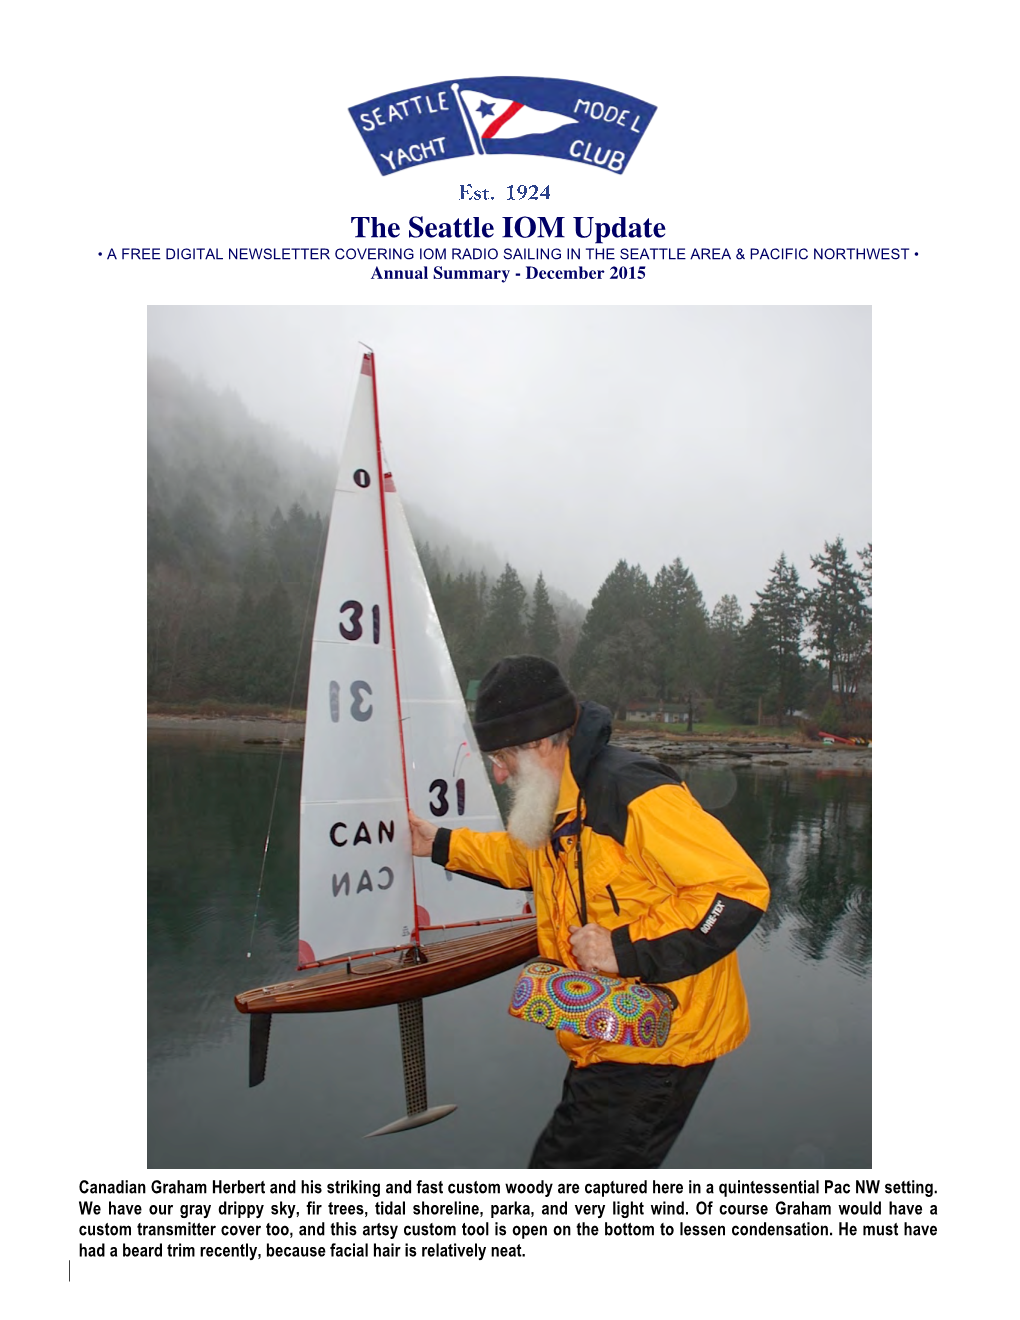 The Seattle IOM Update • a FREE DIGITAL NEWSLETTER COVERING IOM RADIO SAILING in the SEATTLE AREA & PACIFIC NORTHWEST • Annual Summary - December 2015